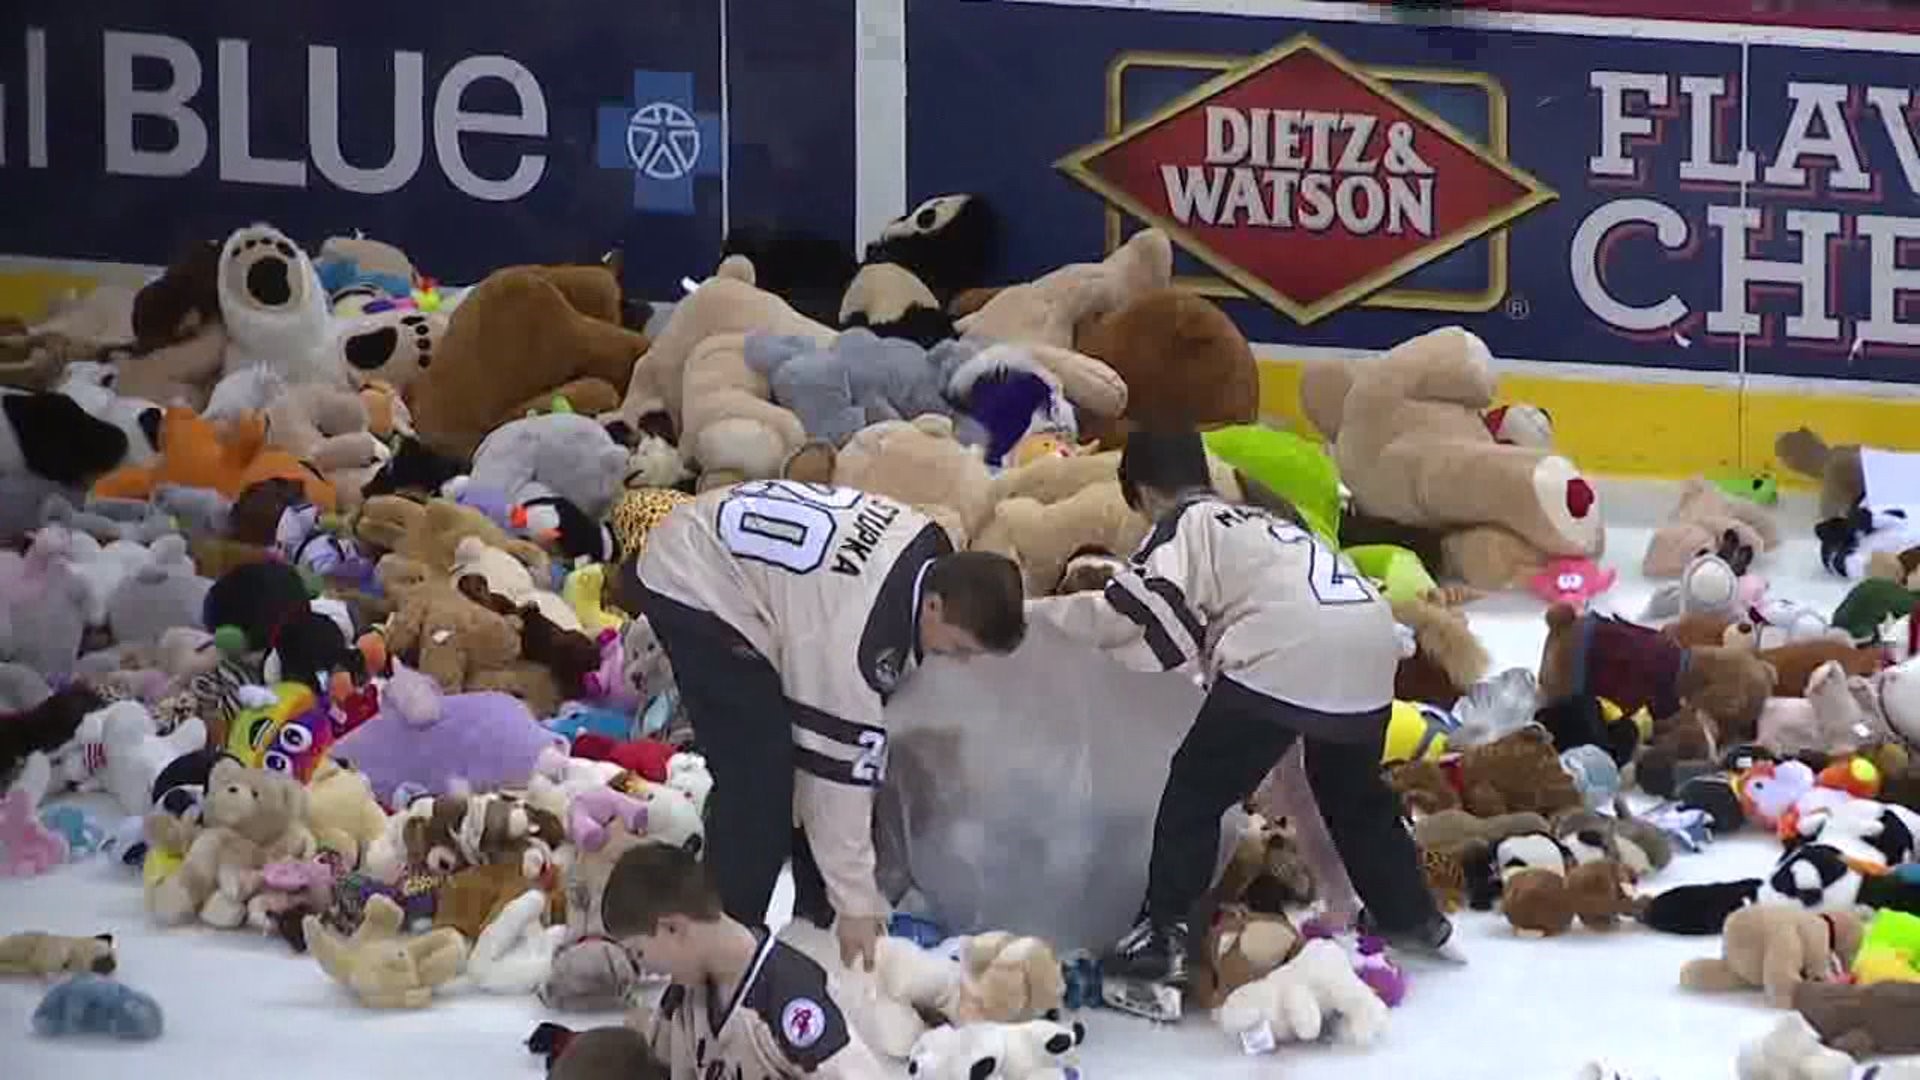 Here is the full video of the World Famous Hershey Bears Teddy Toss in 2023.